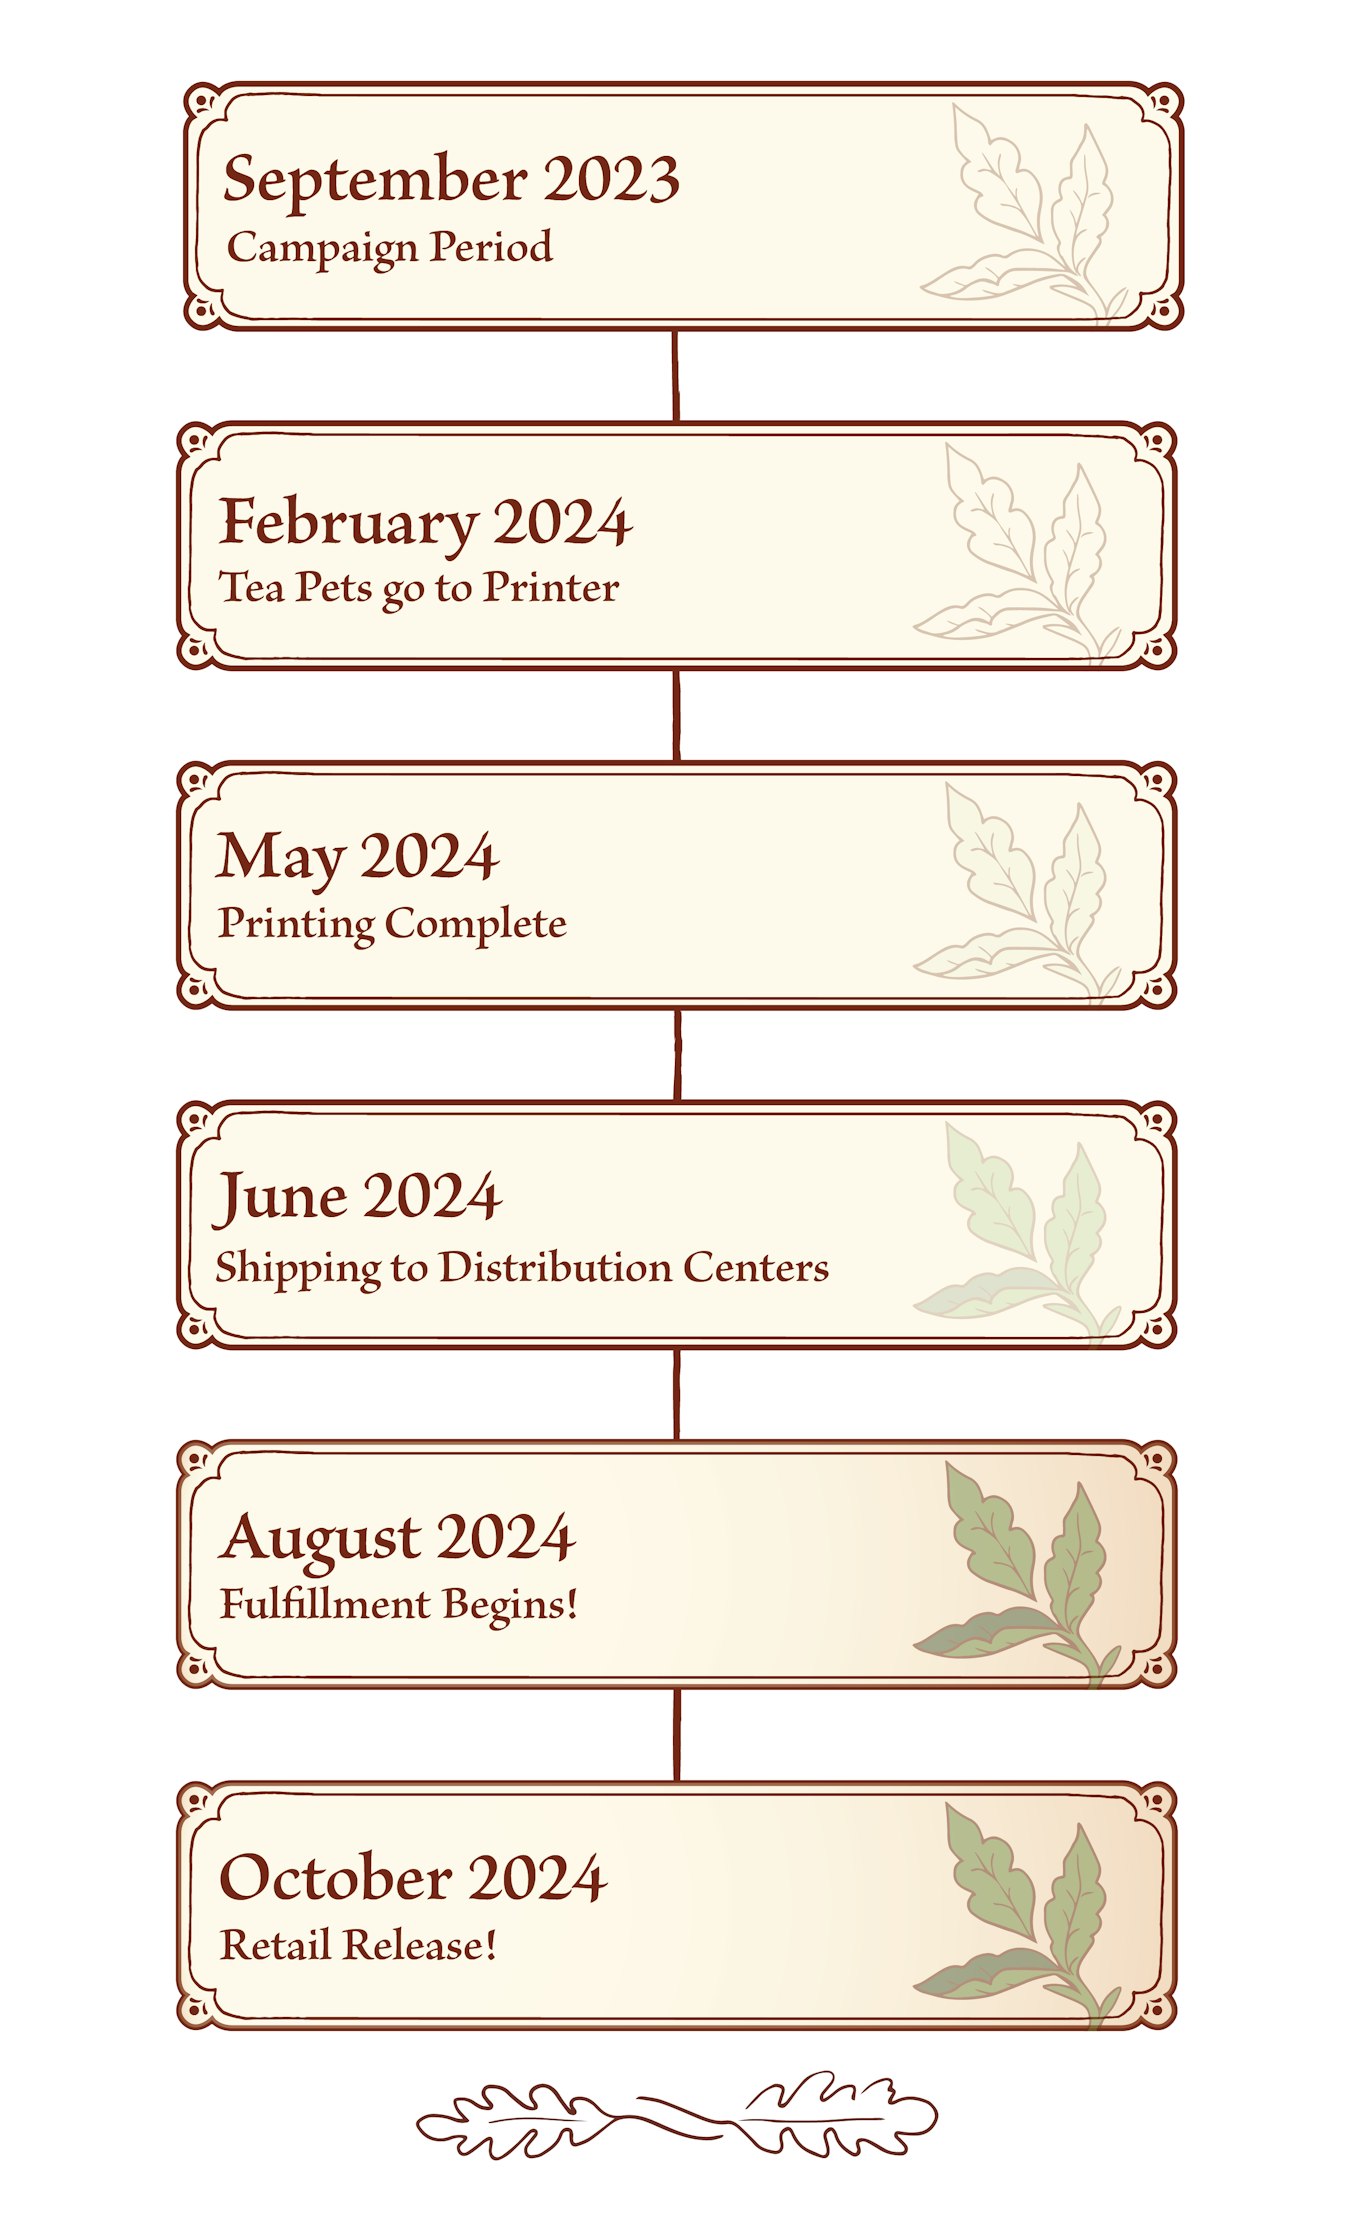 2023 September Campaign period. 2024 February Tea Pets goes to printer, May printing complete, June shipping to distribution, August fulfillment begins, October retail release  